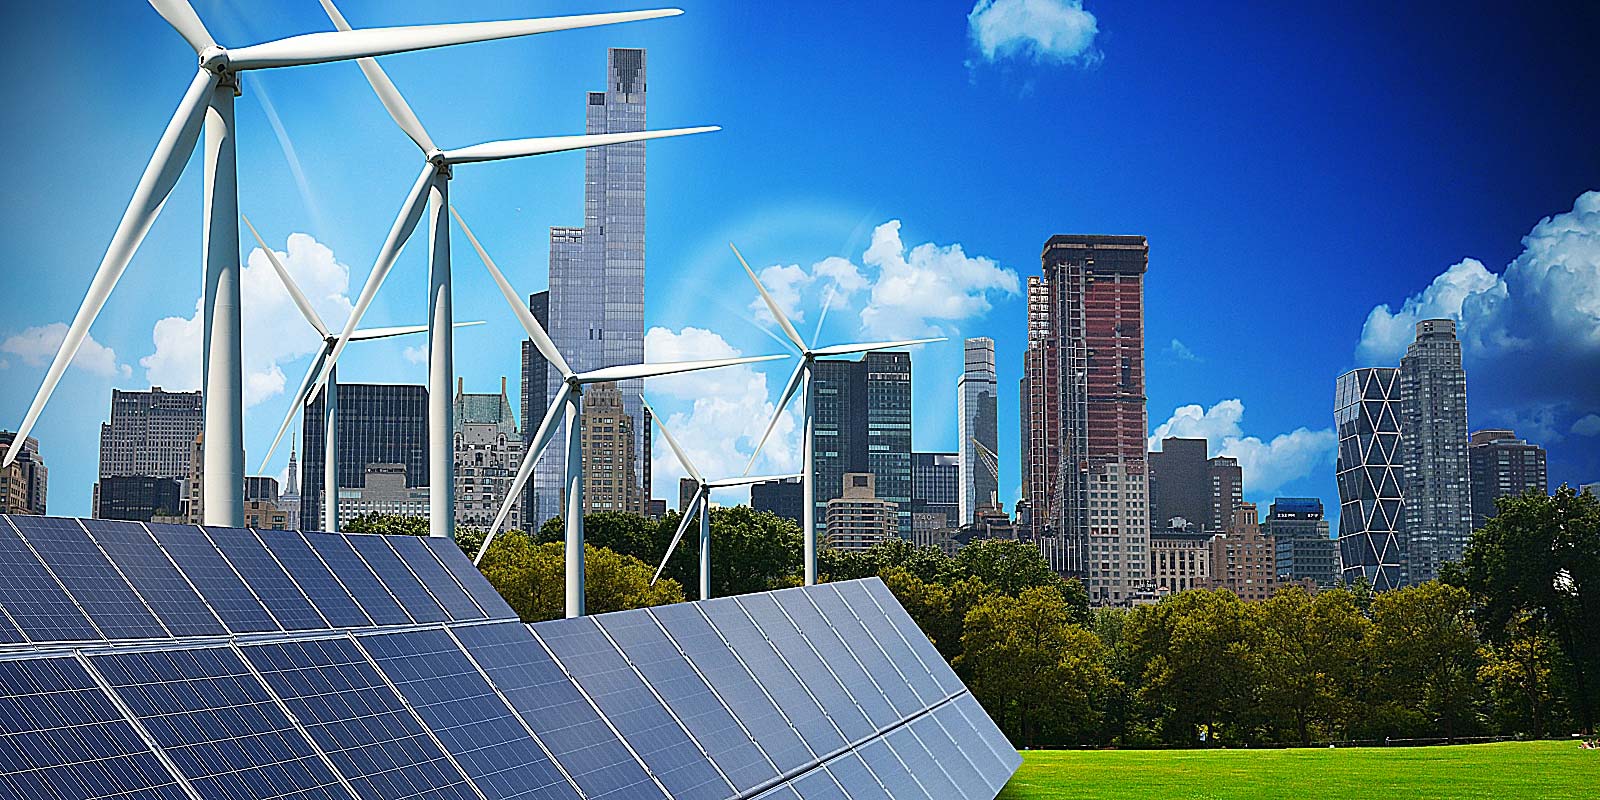 Going green could pay off in trillions